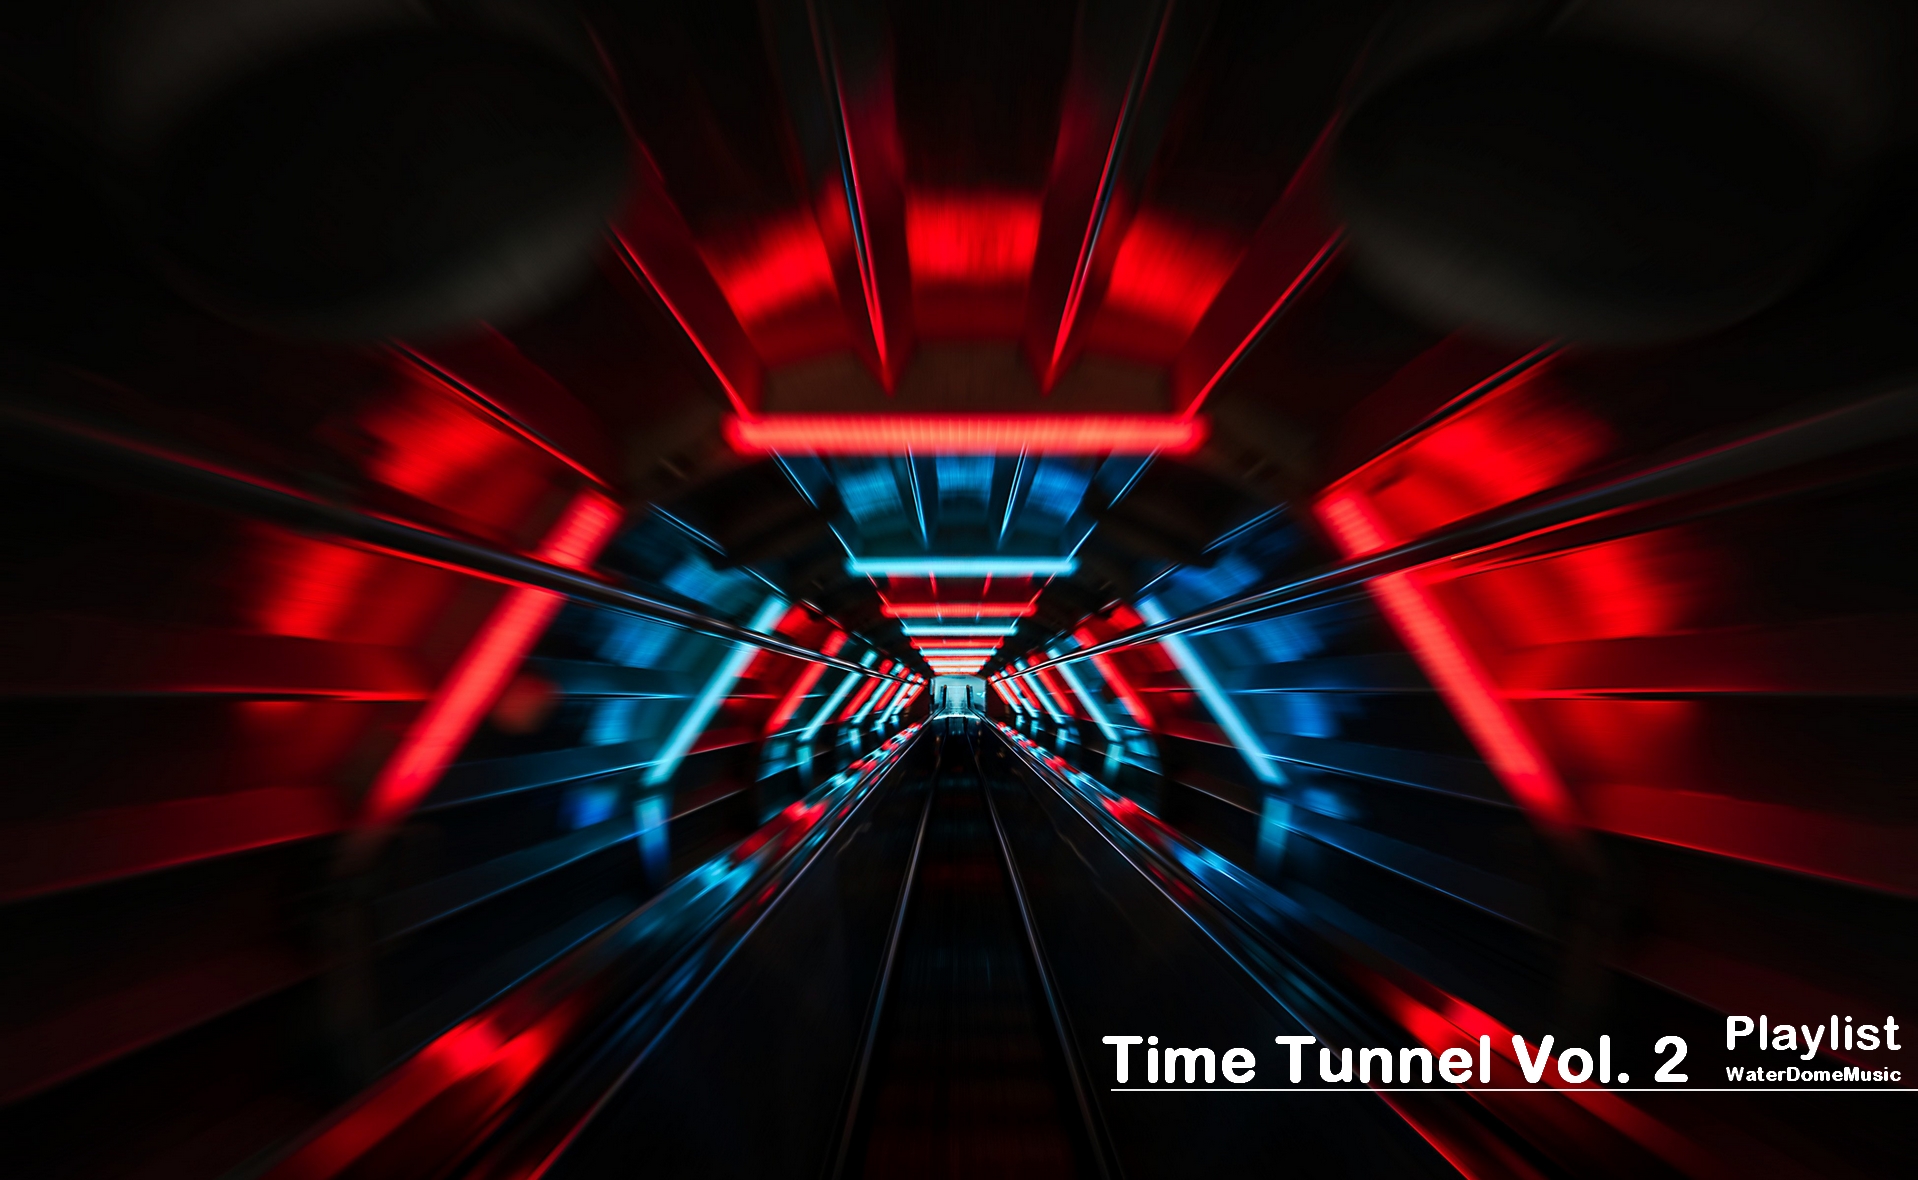 Time Tunnel Vol. 2